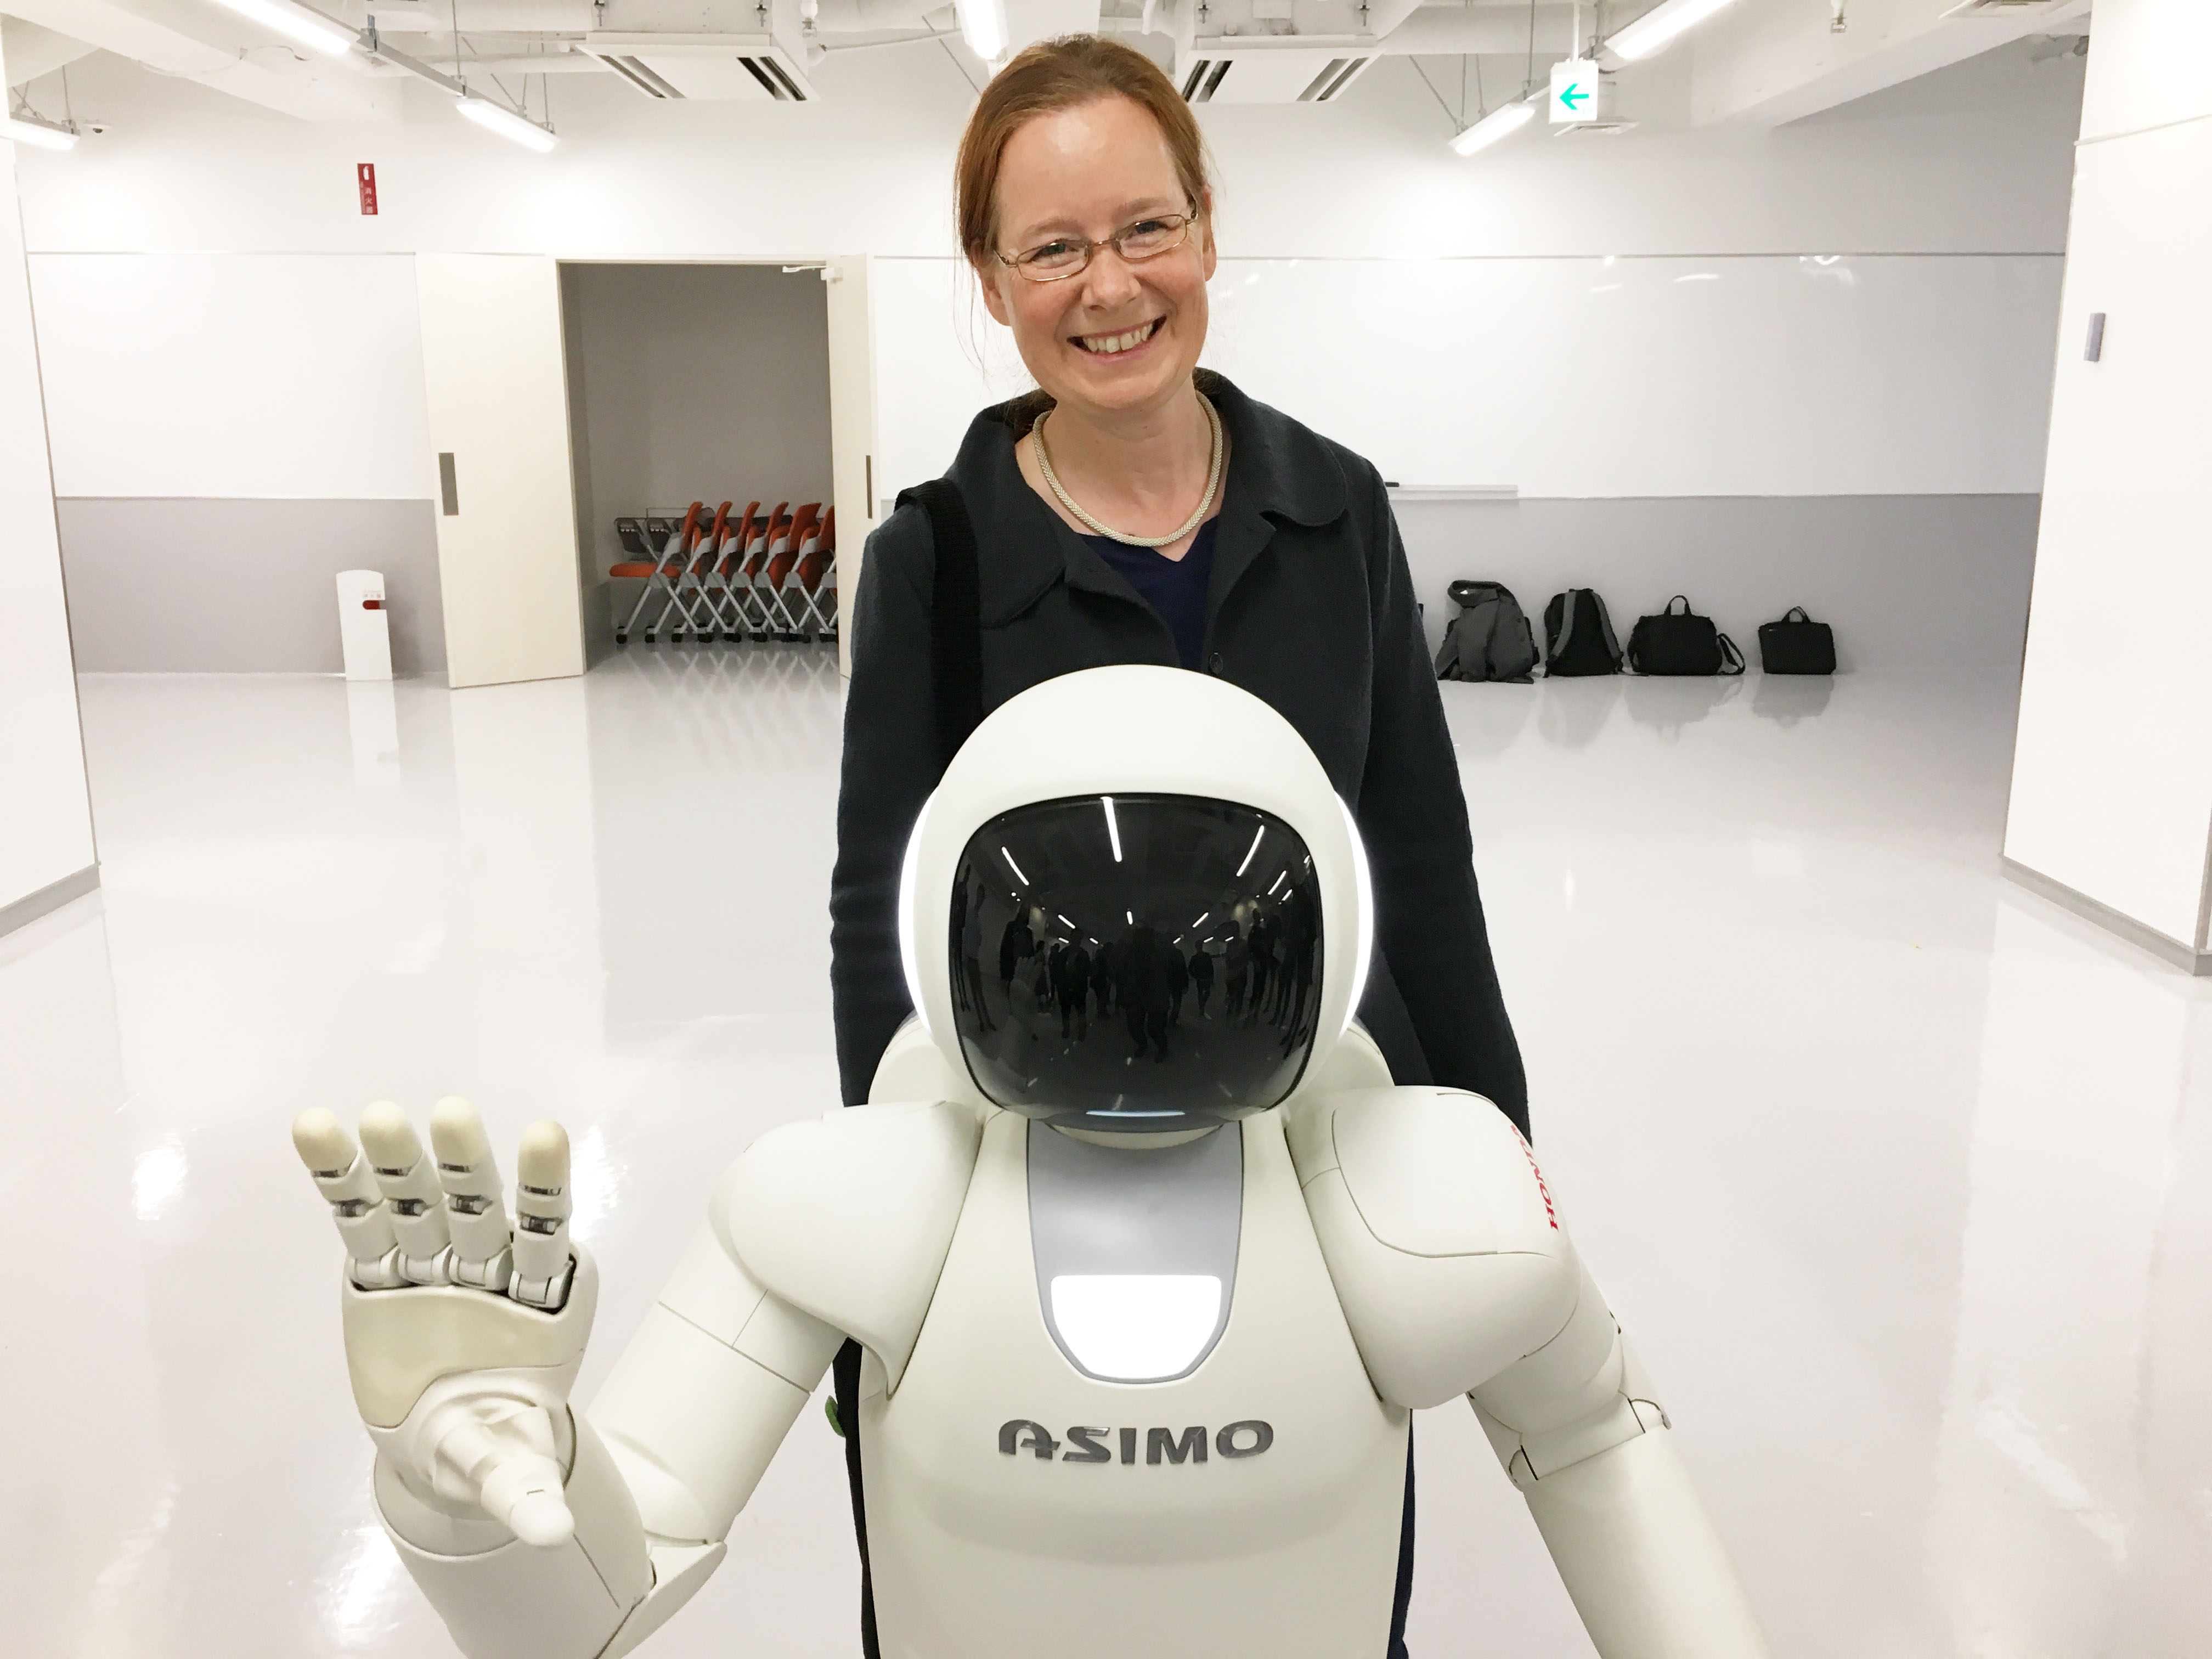 During a study trip to Tokyo: Kerstin Fischer and ASIMO, a humanoid robot by Honda.